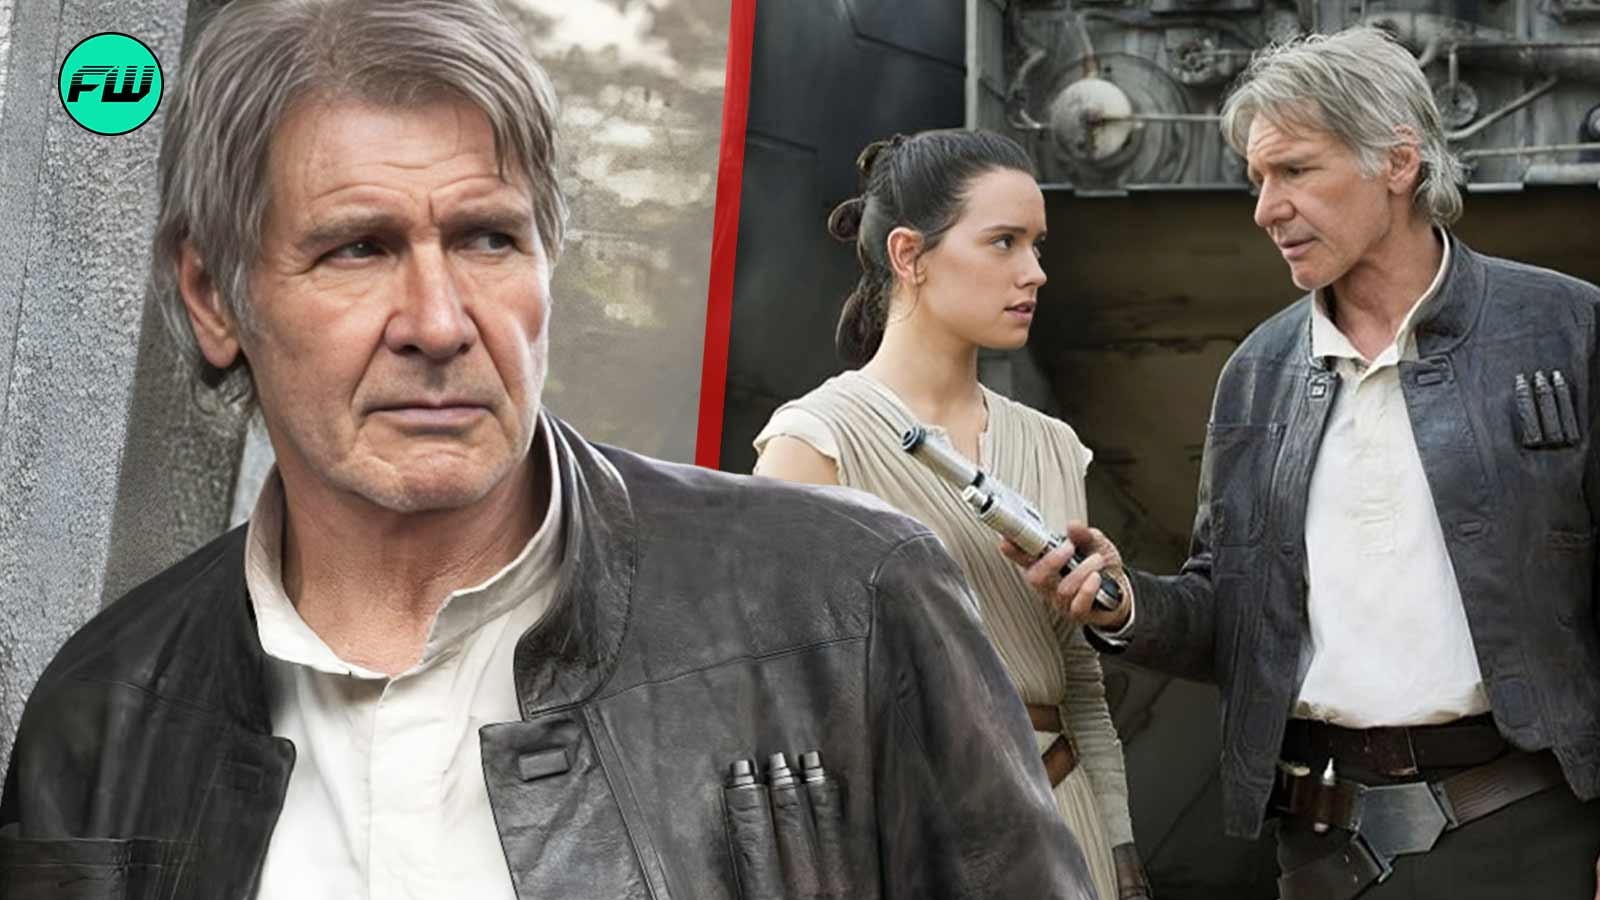 harrison ford-star wars the force awakens